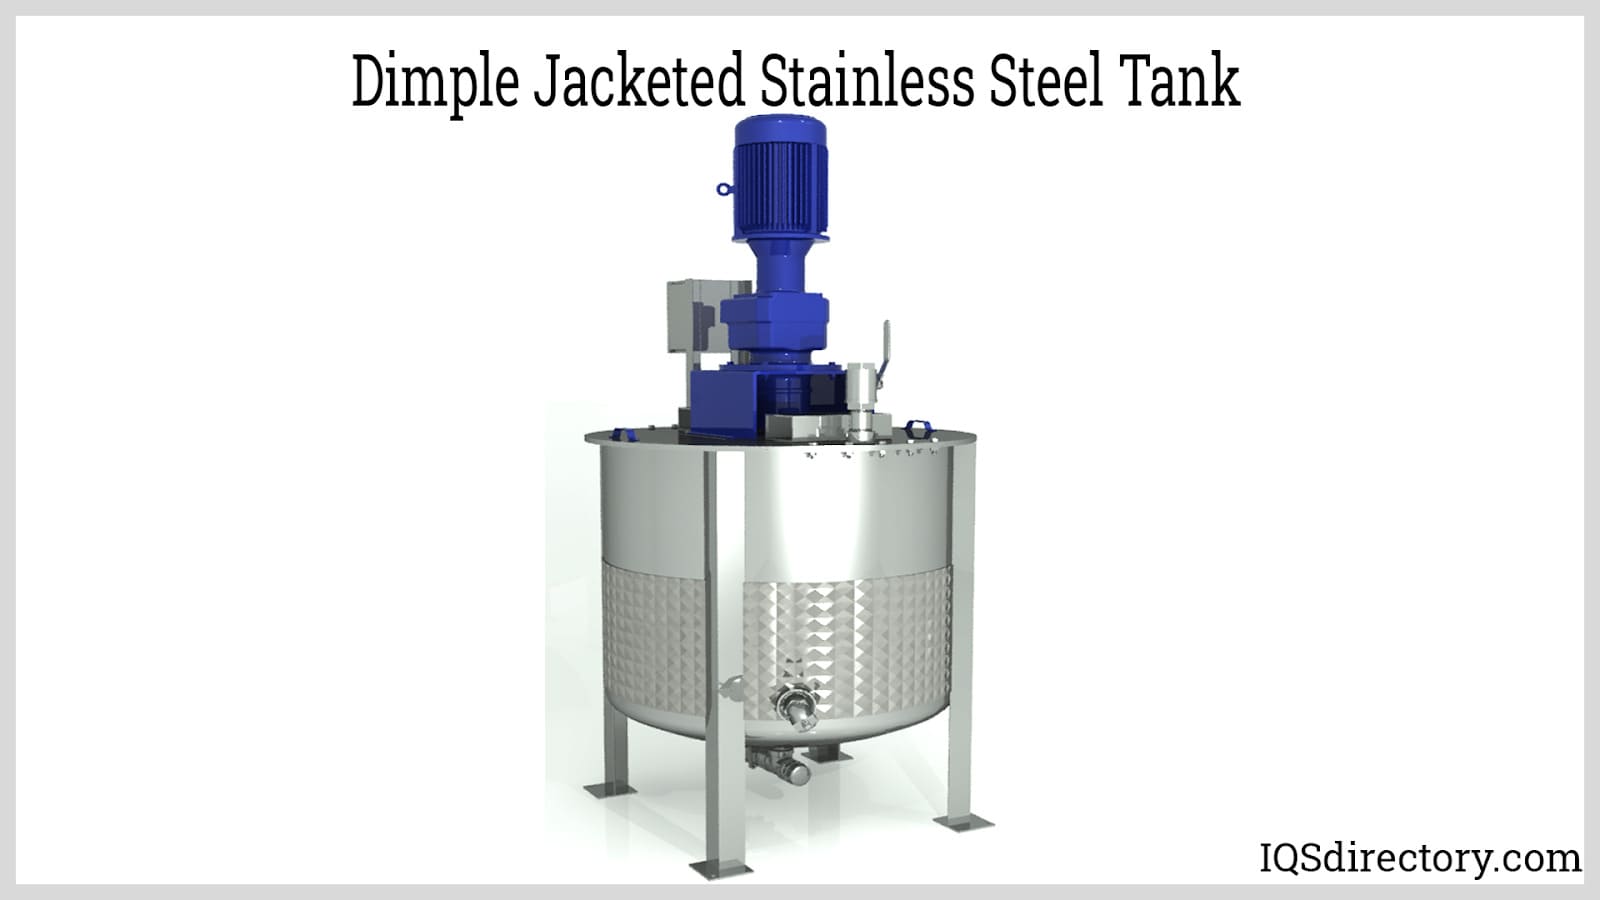 Dimple Jacketed Stainless Steel Tank